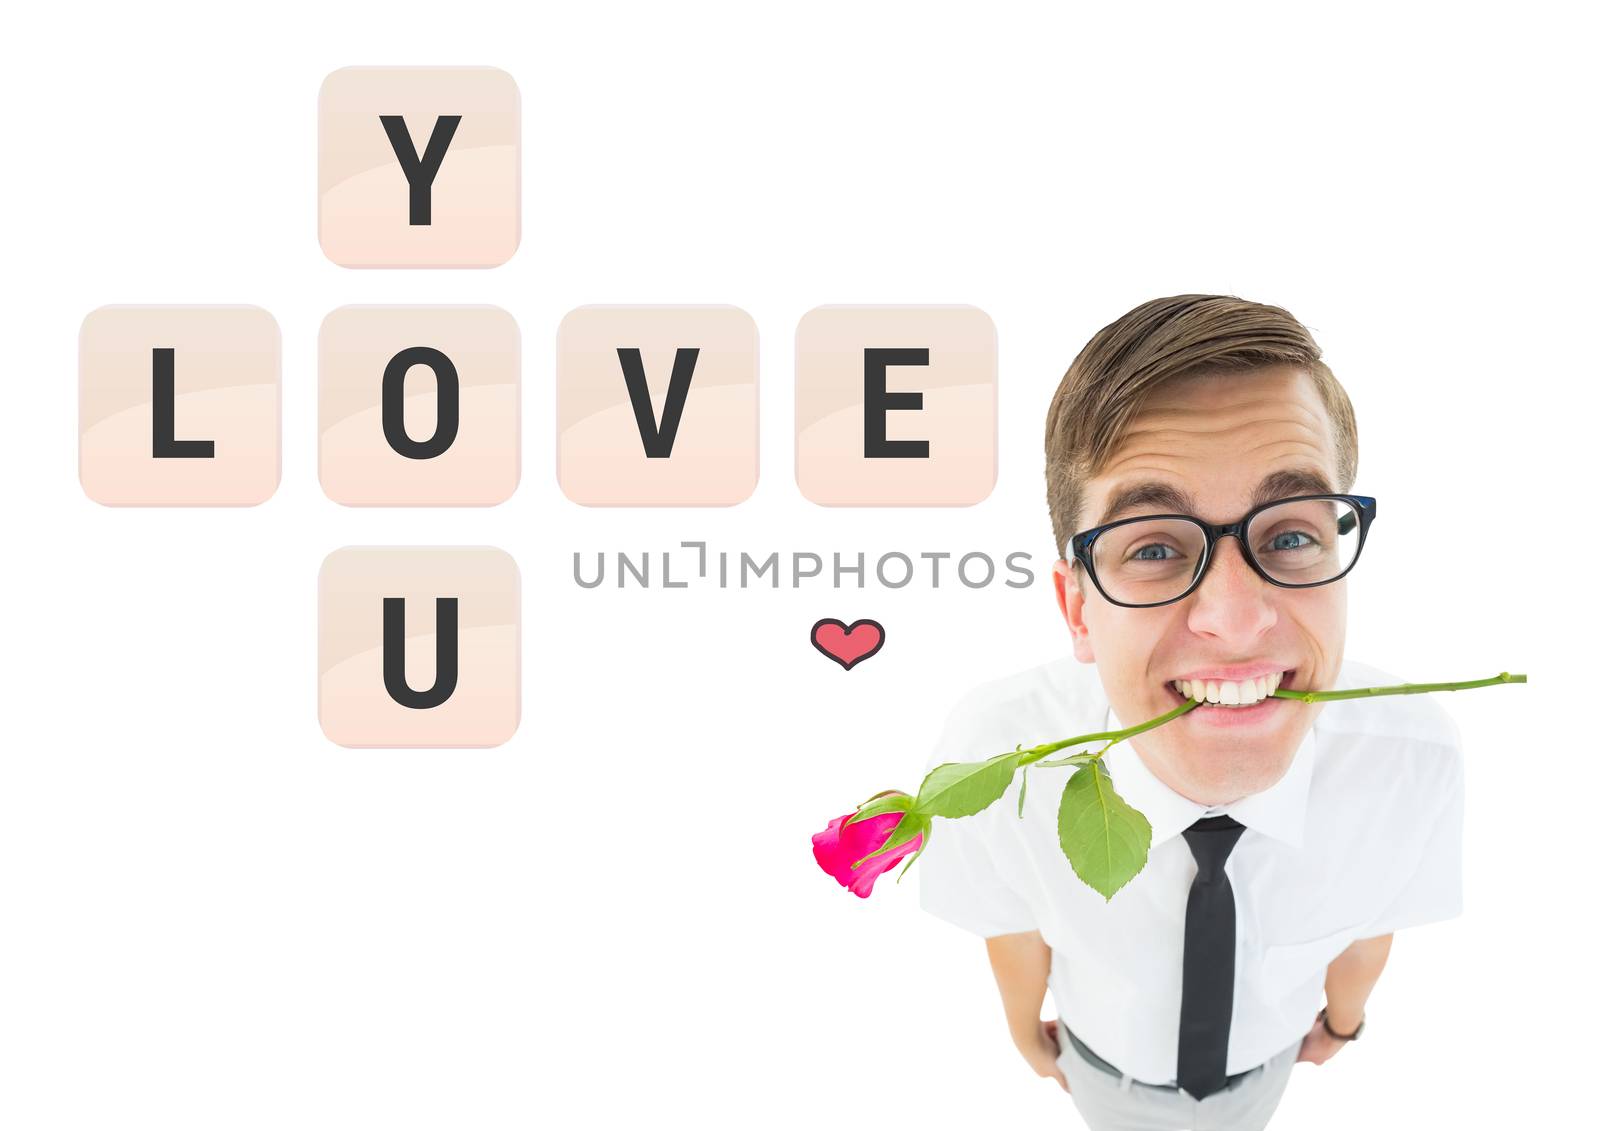 Composite image of romantic geeky hipster by Wavebreakmedia